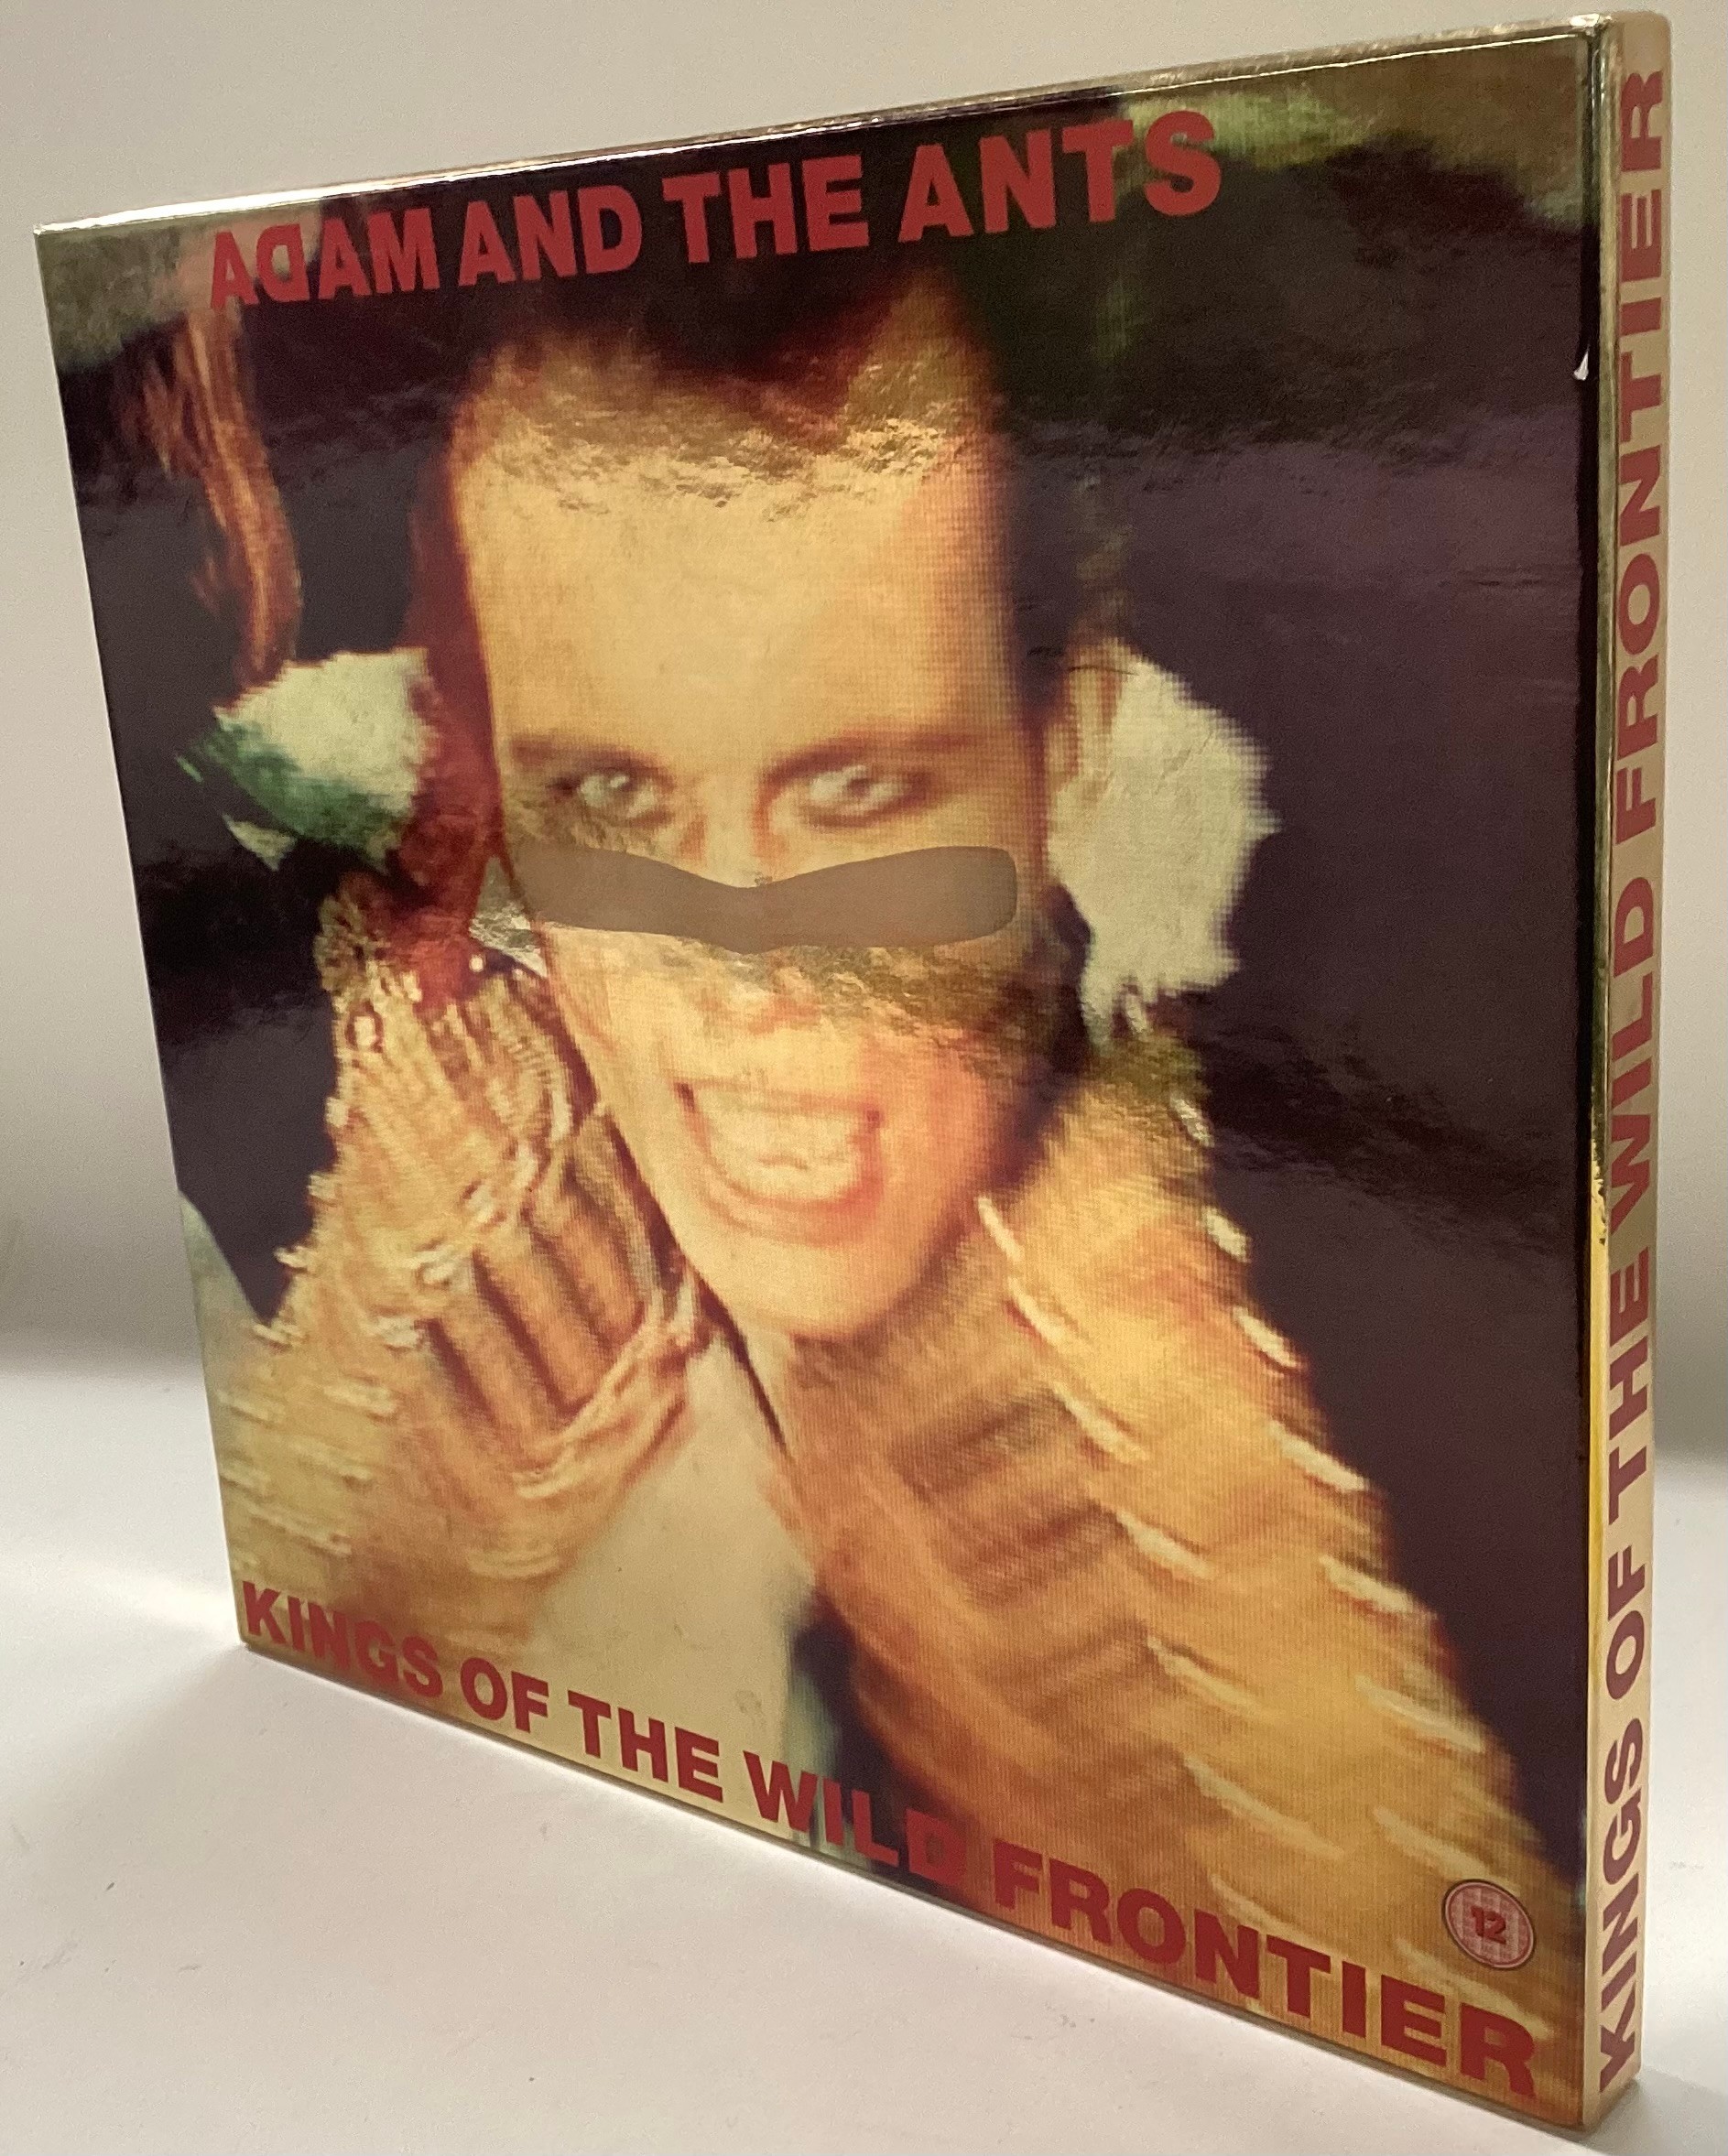 ADAM AND THE ANTS KINGS OF THE WILD FRONTIER 2016 DELUXE BOX SET GOLD VINYL. Vinyl + Cd Box Set - Image 3 of 10